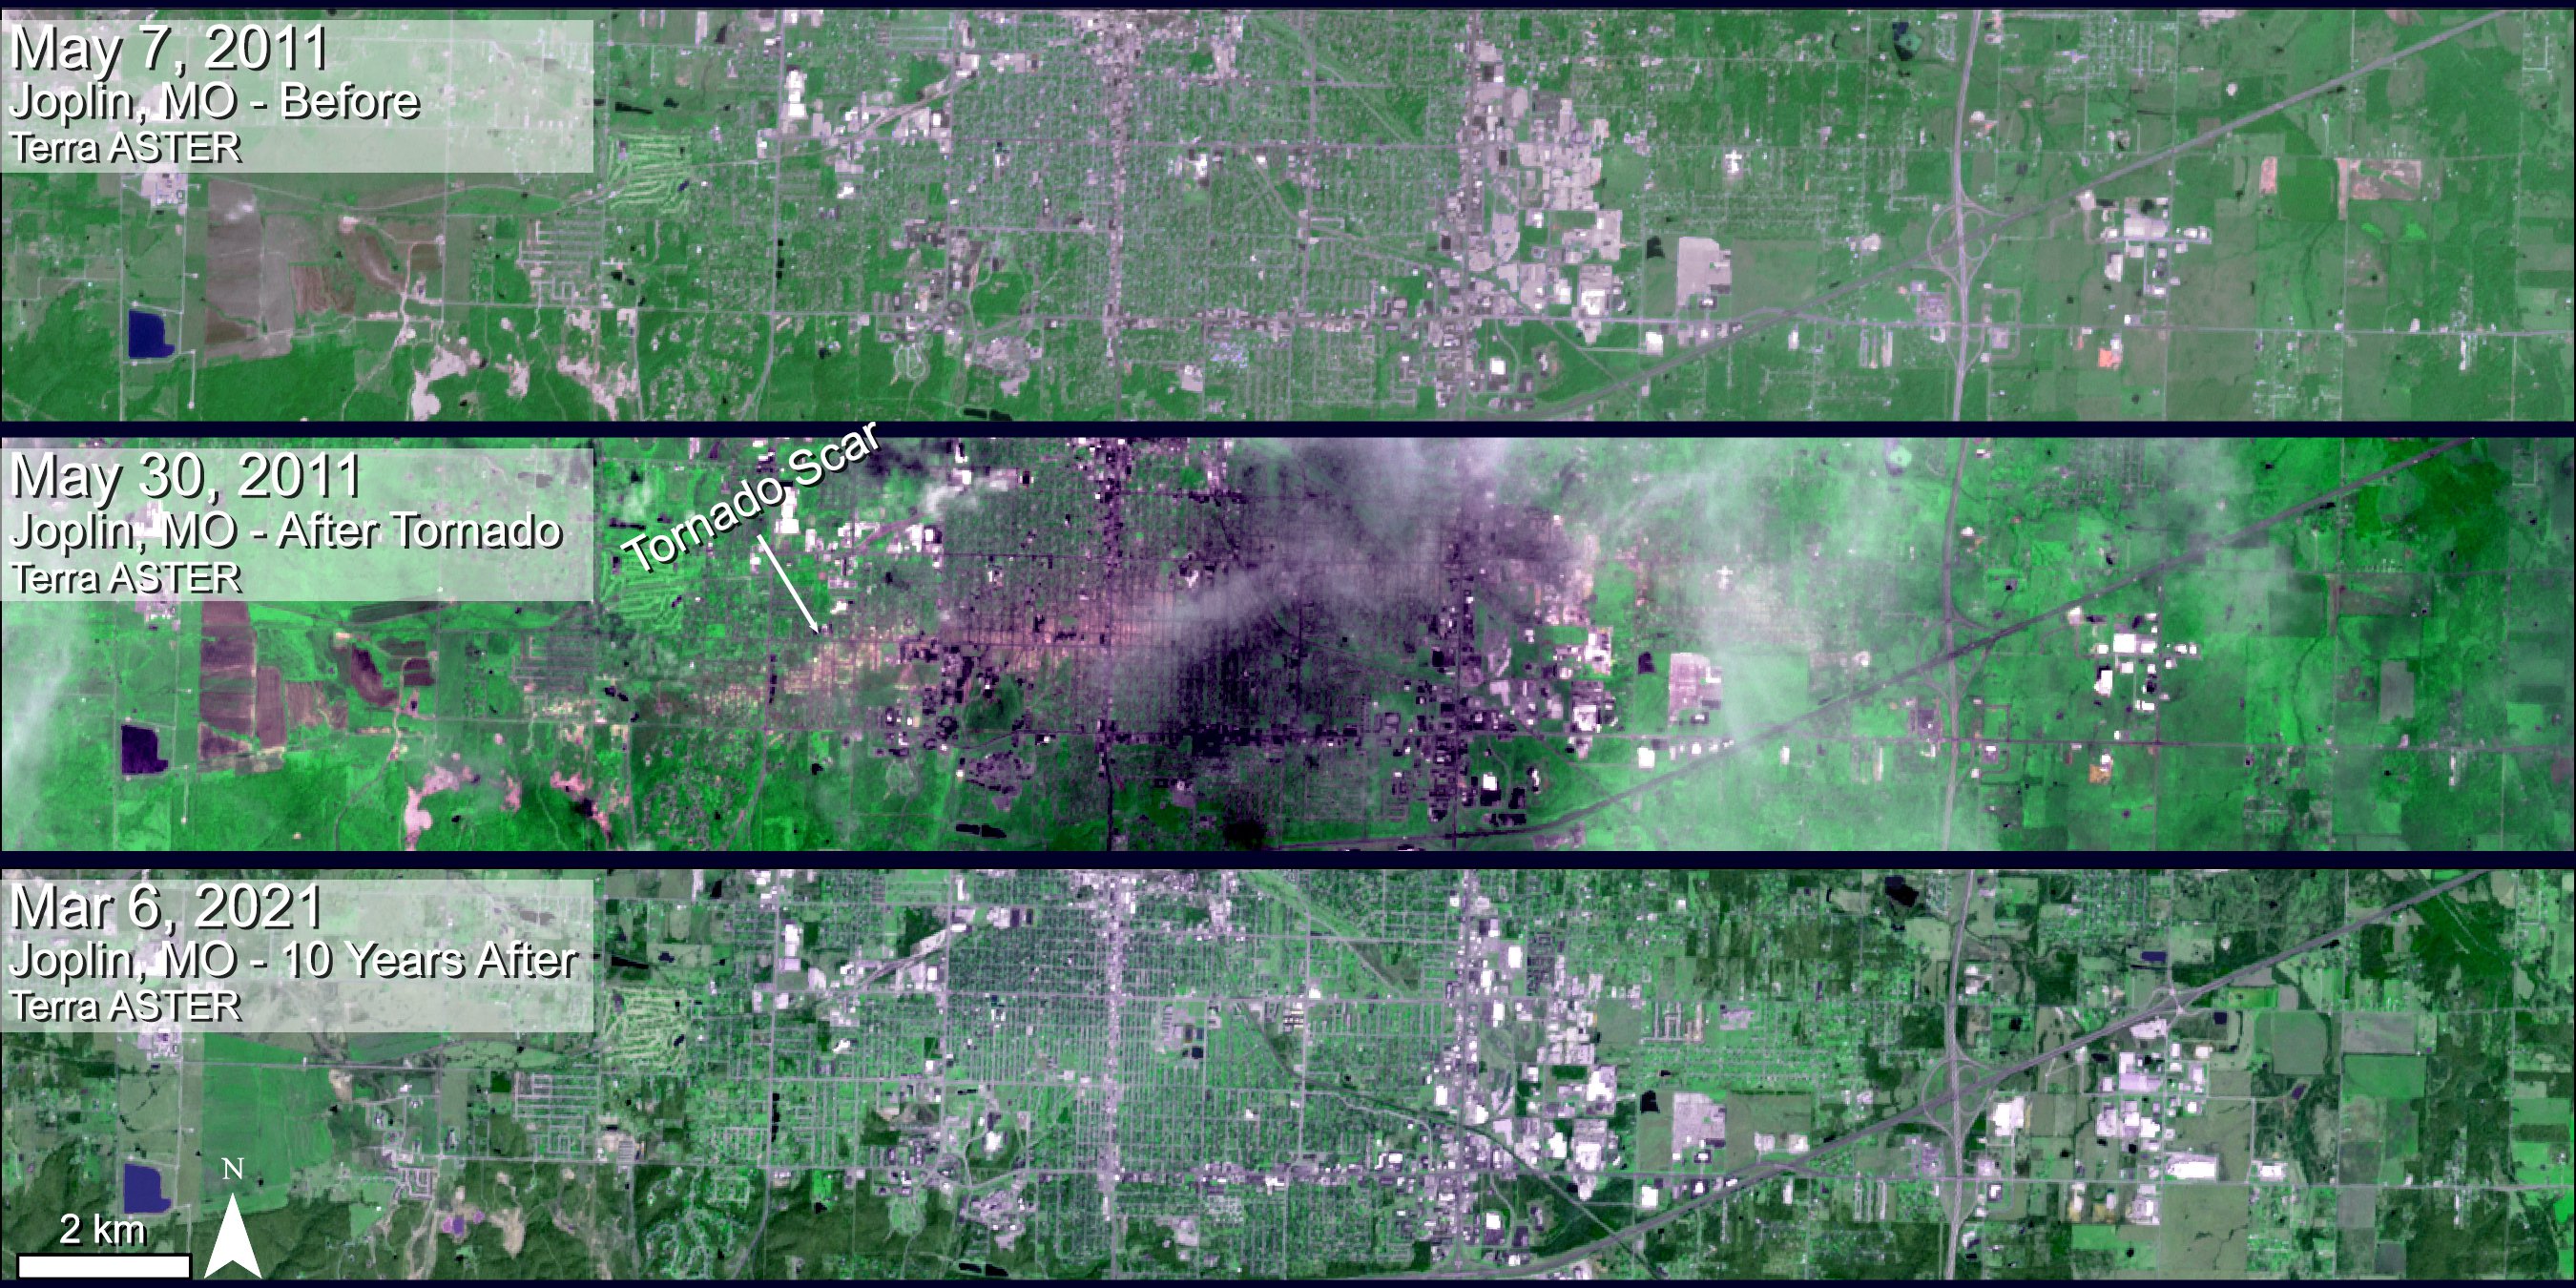 Three Terra ASTER images showing Joplin, Missouri before, after, and 10 years after the EF-5 tornado. A tornado scar is visible in the middle and bottom image.